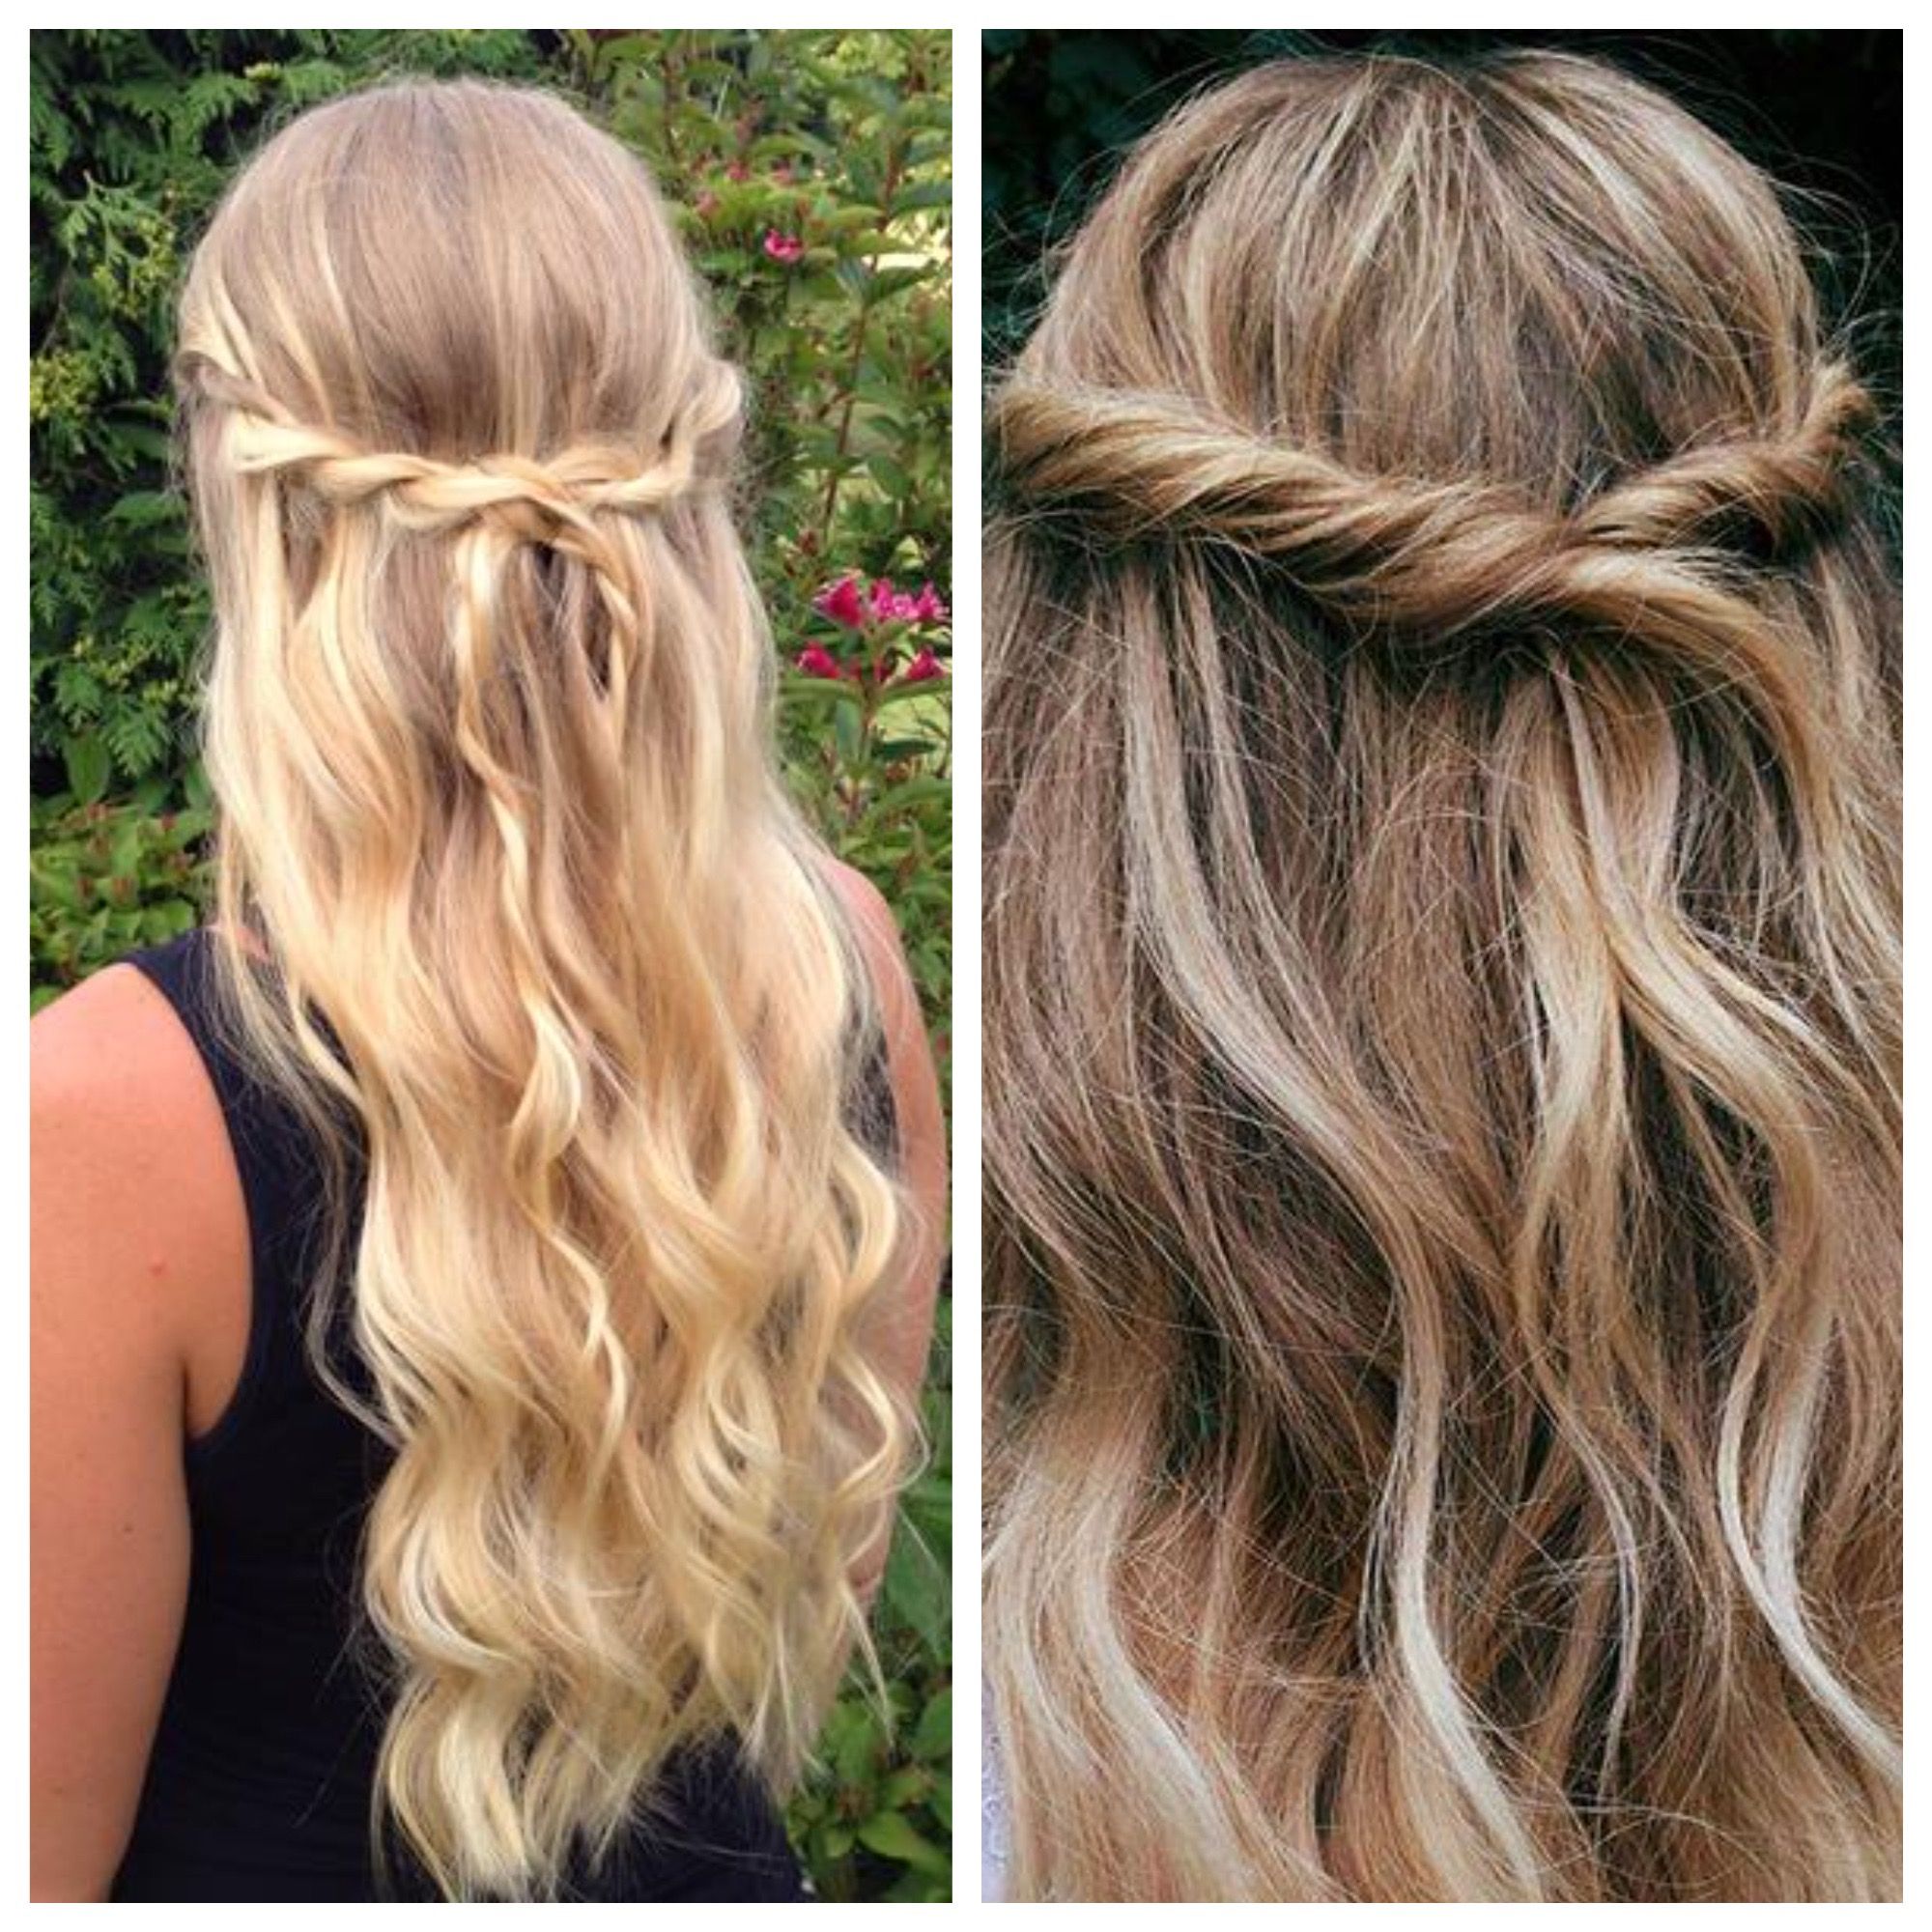 Simple And Easy Half Up Hairstyles For Weddings – Hair World Magazine Throughout Widely Used Double Crown Braid Prom Hairstyles (View 18 of 20)